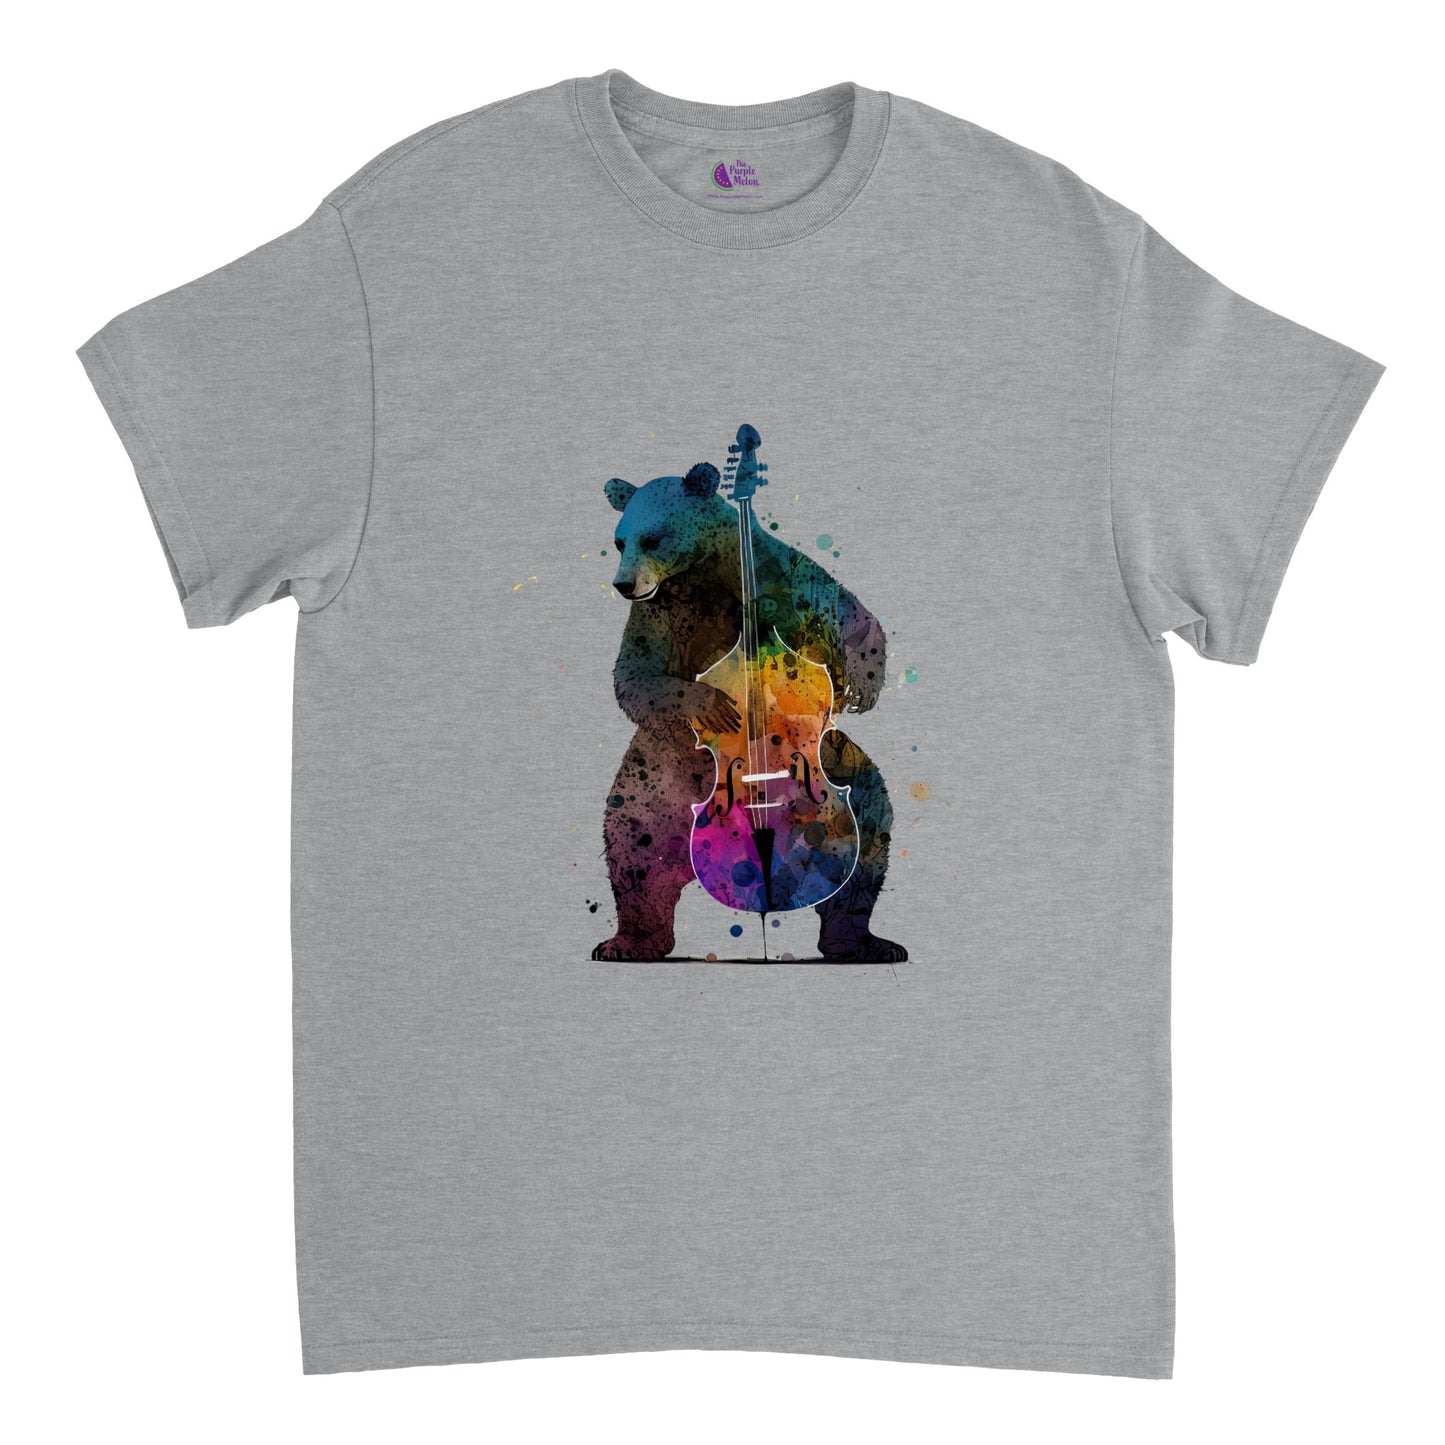 grey t-shirt with a bear playing a colourful double bass